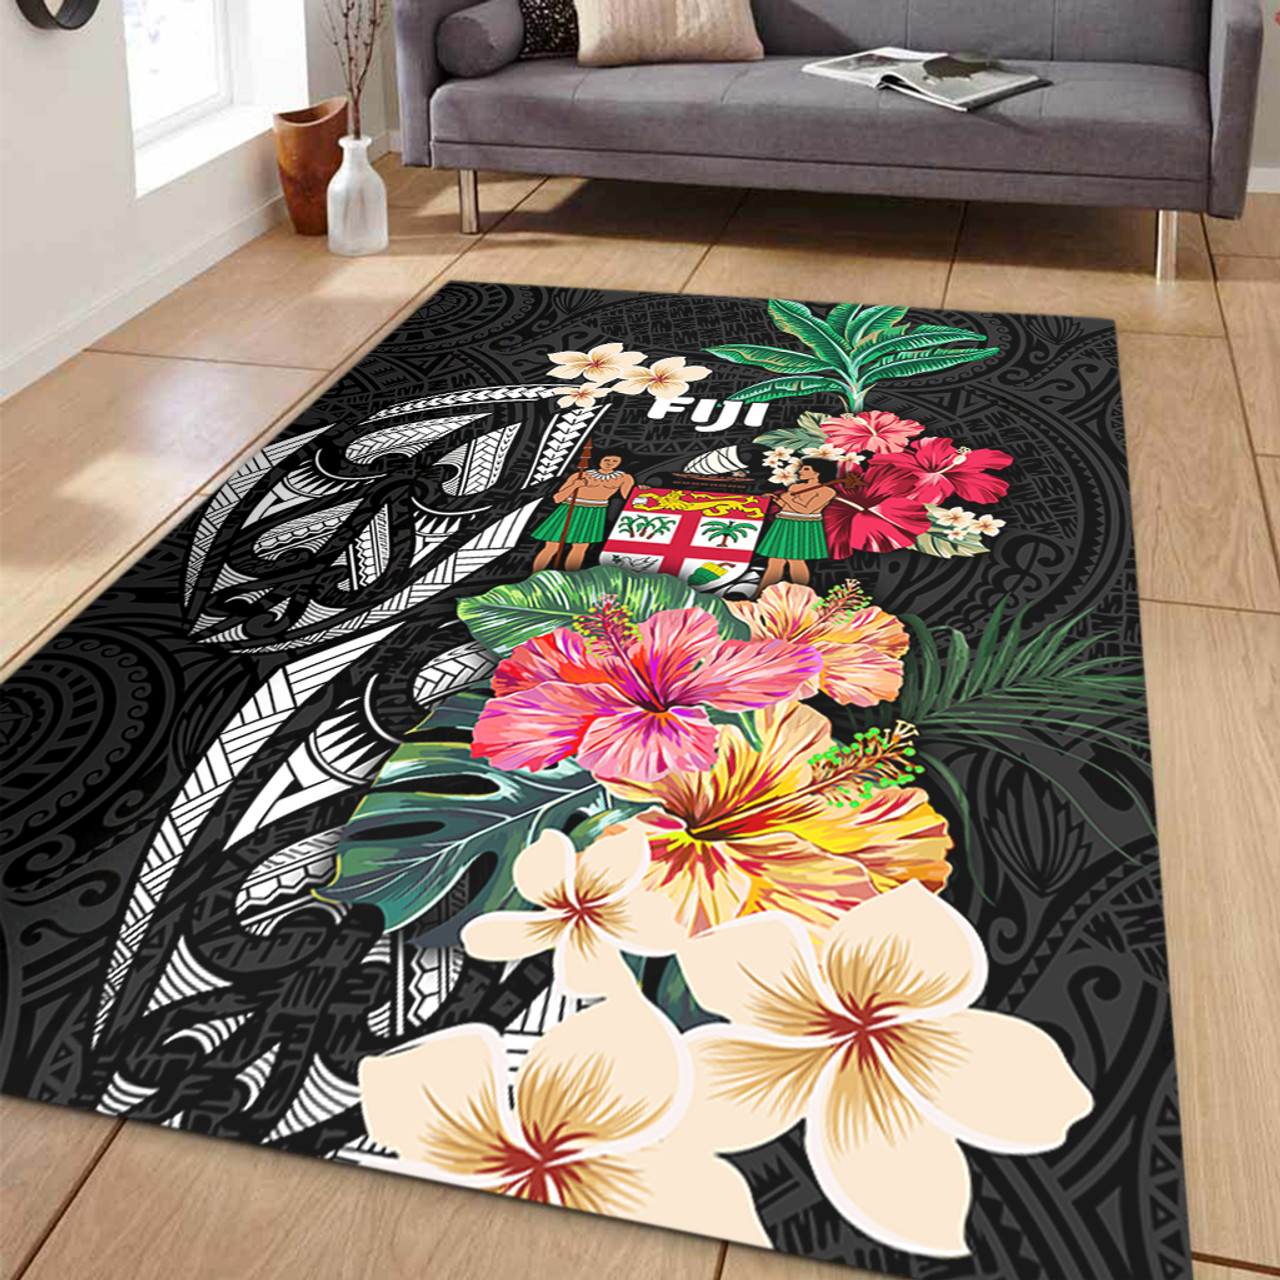 Fiji Area Rug Coat Of Arms Polynesian With Hibiscus